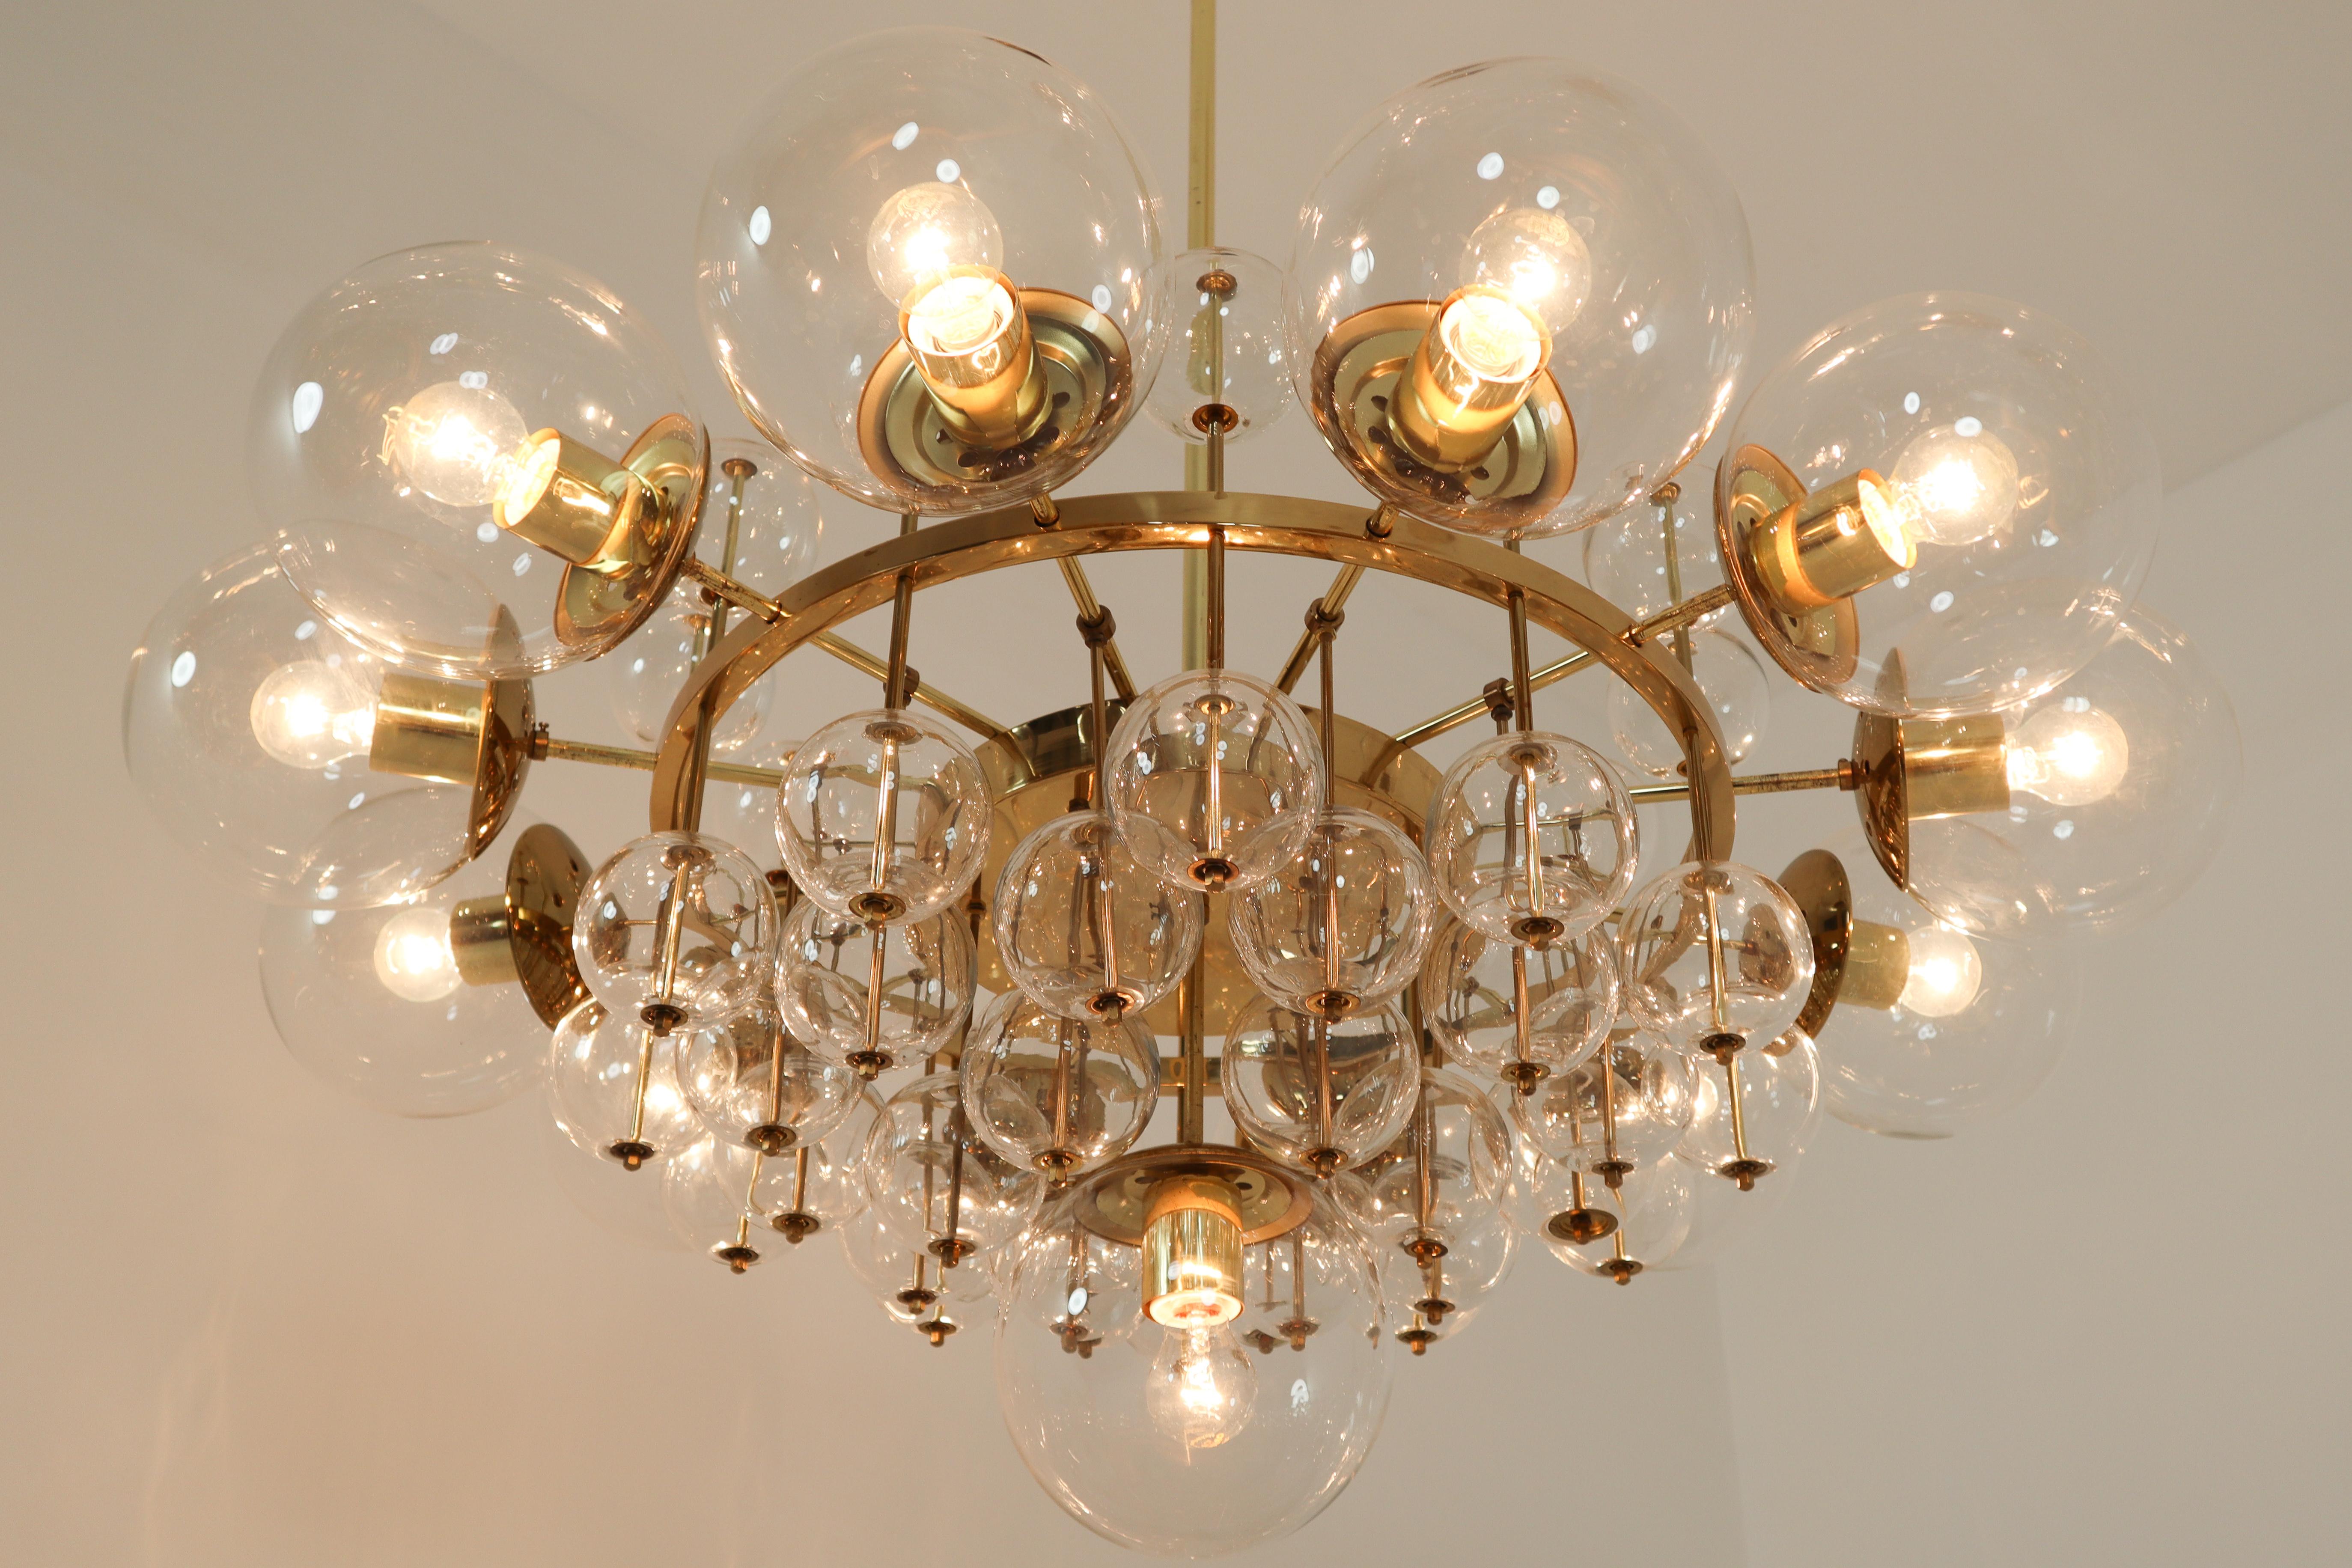 Midcentury Hotel Chandelier with Brass Fixture and Hand-Blowed Glass Globes im Zustand „Gut“ in Almelo, NL